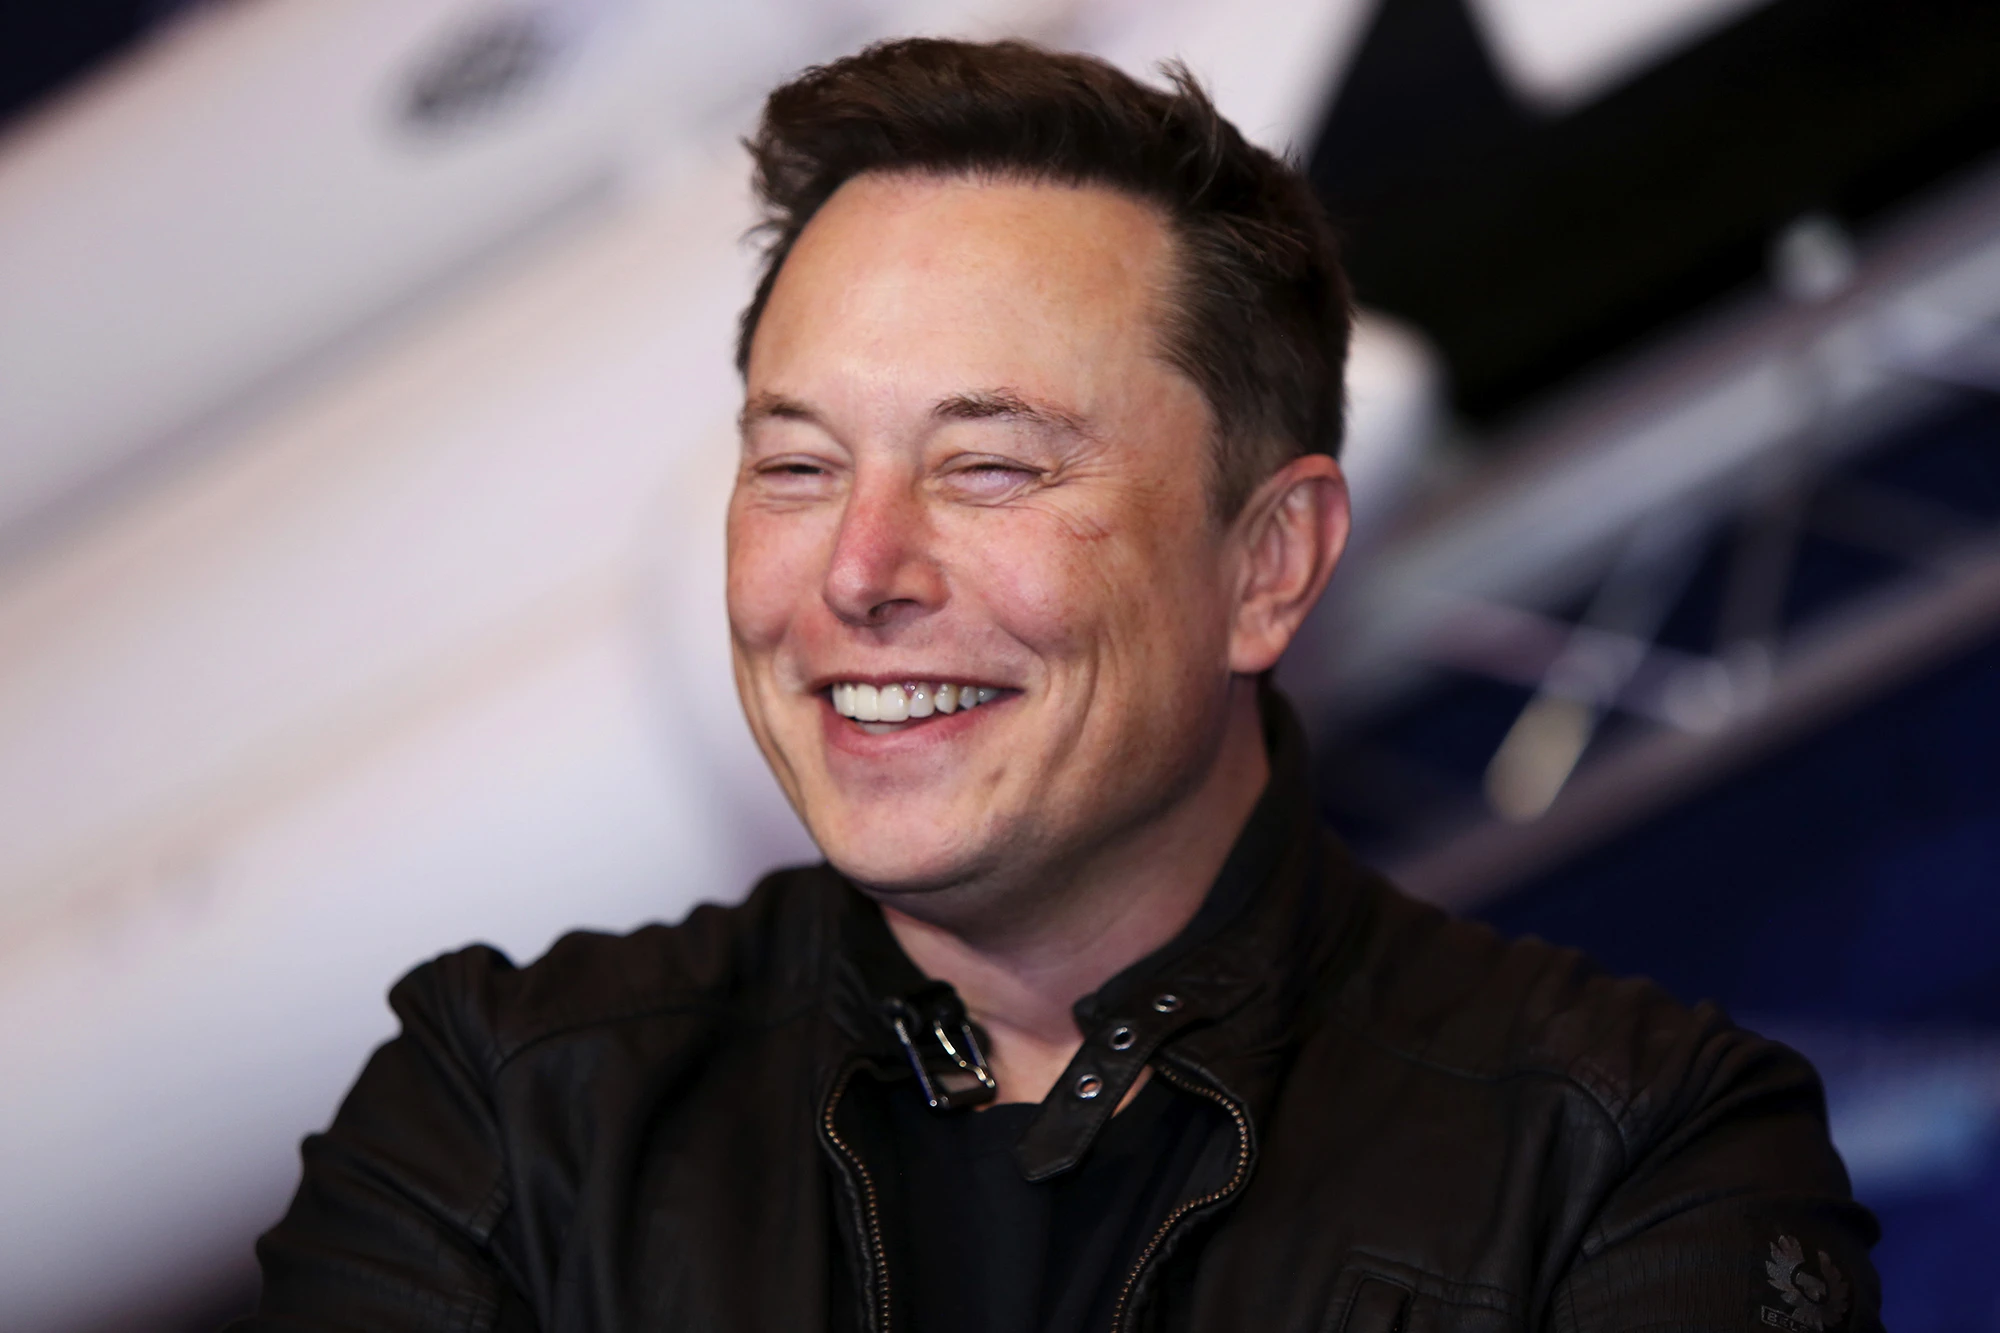 Elon Musk plans to build his own city in the US state of Texas